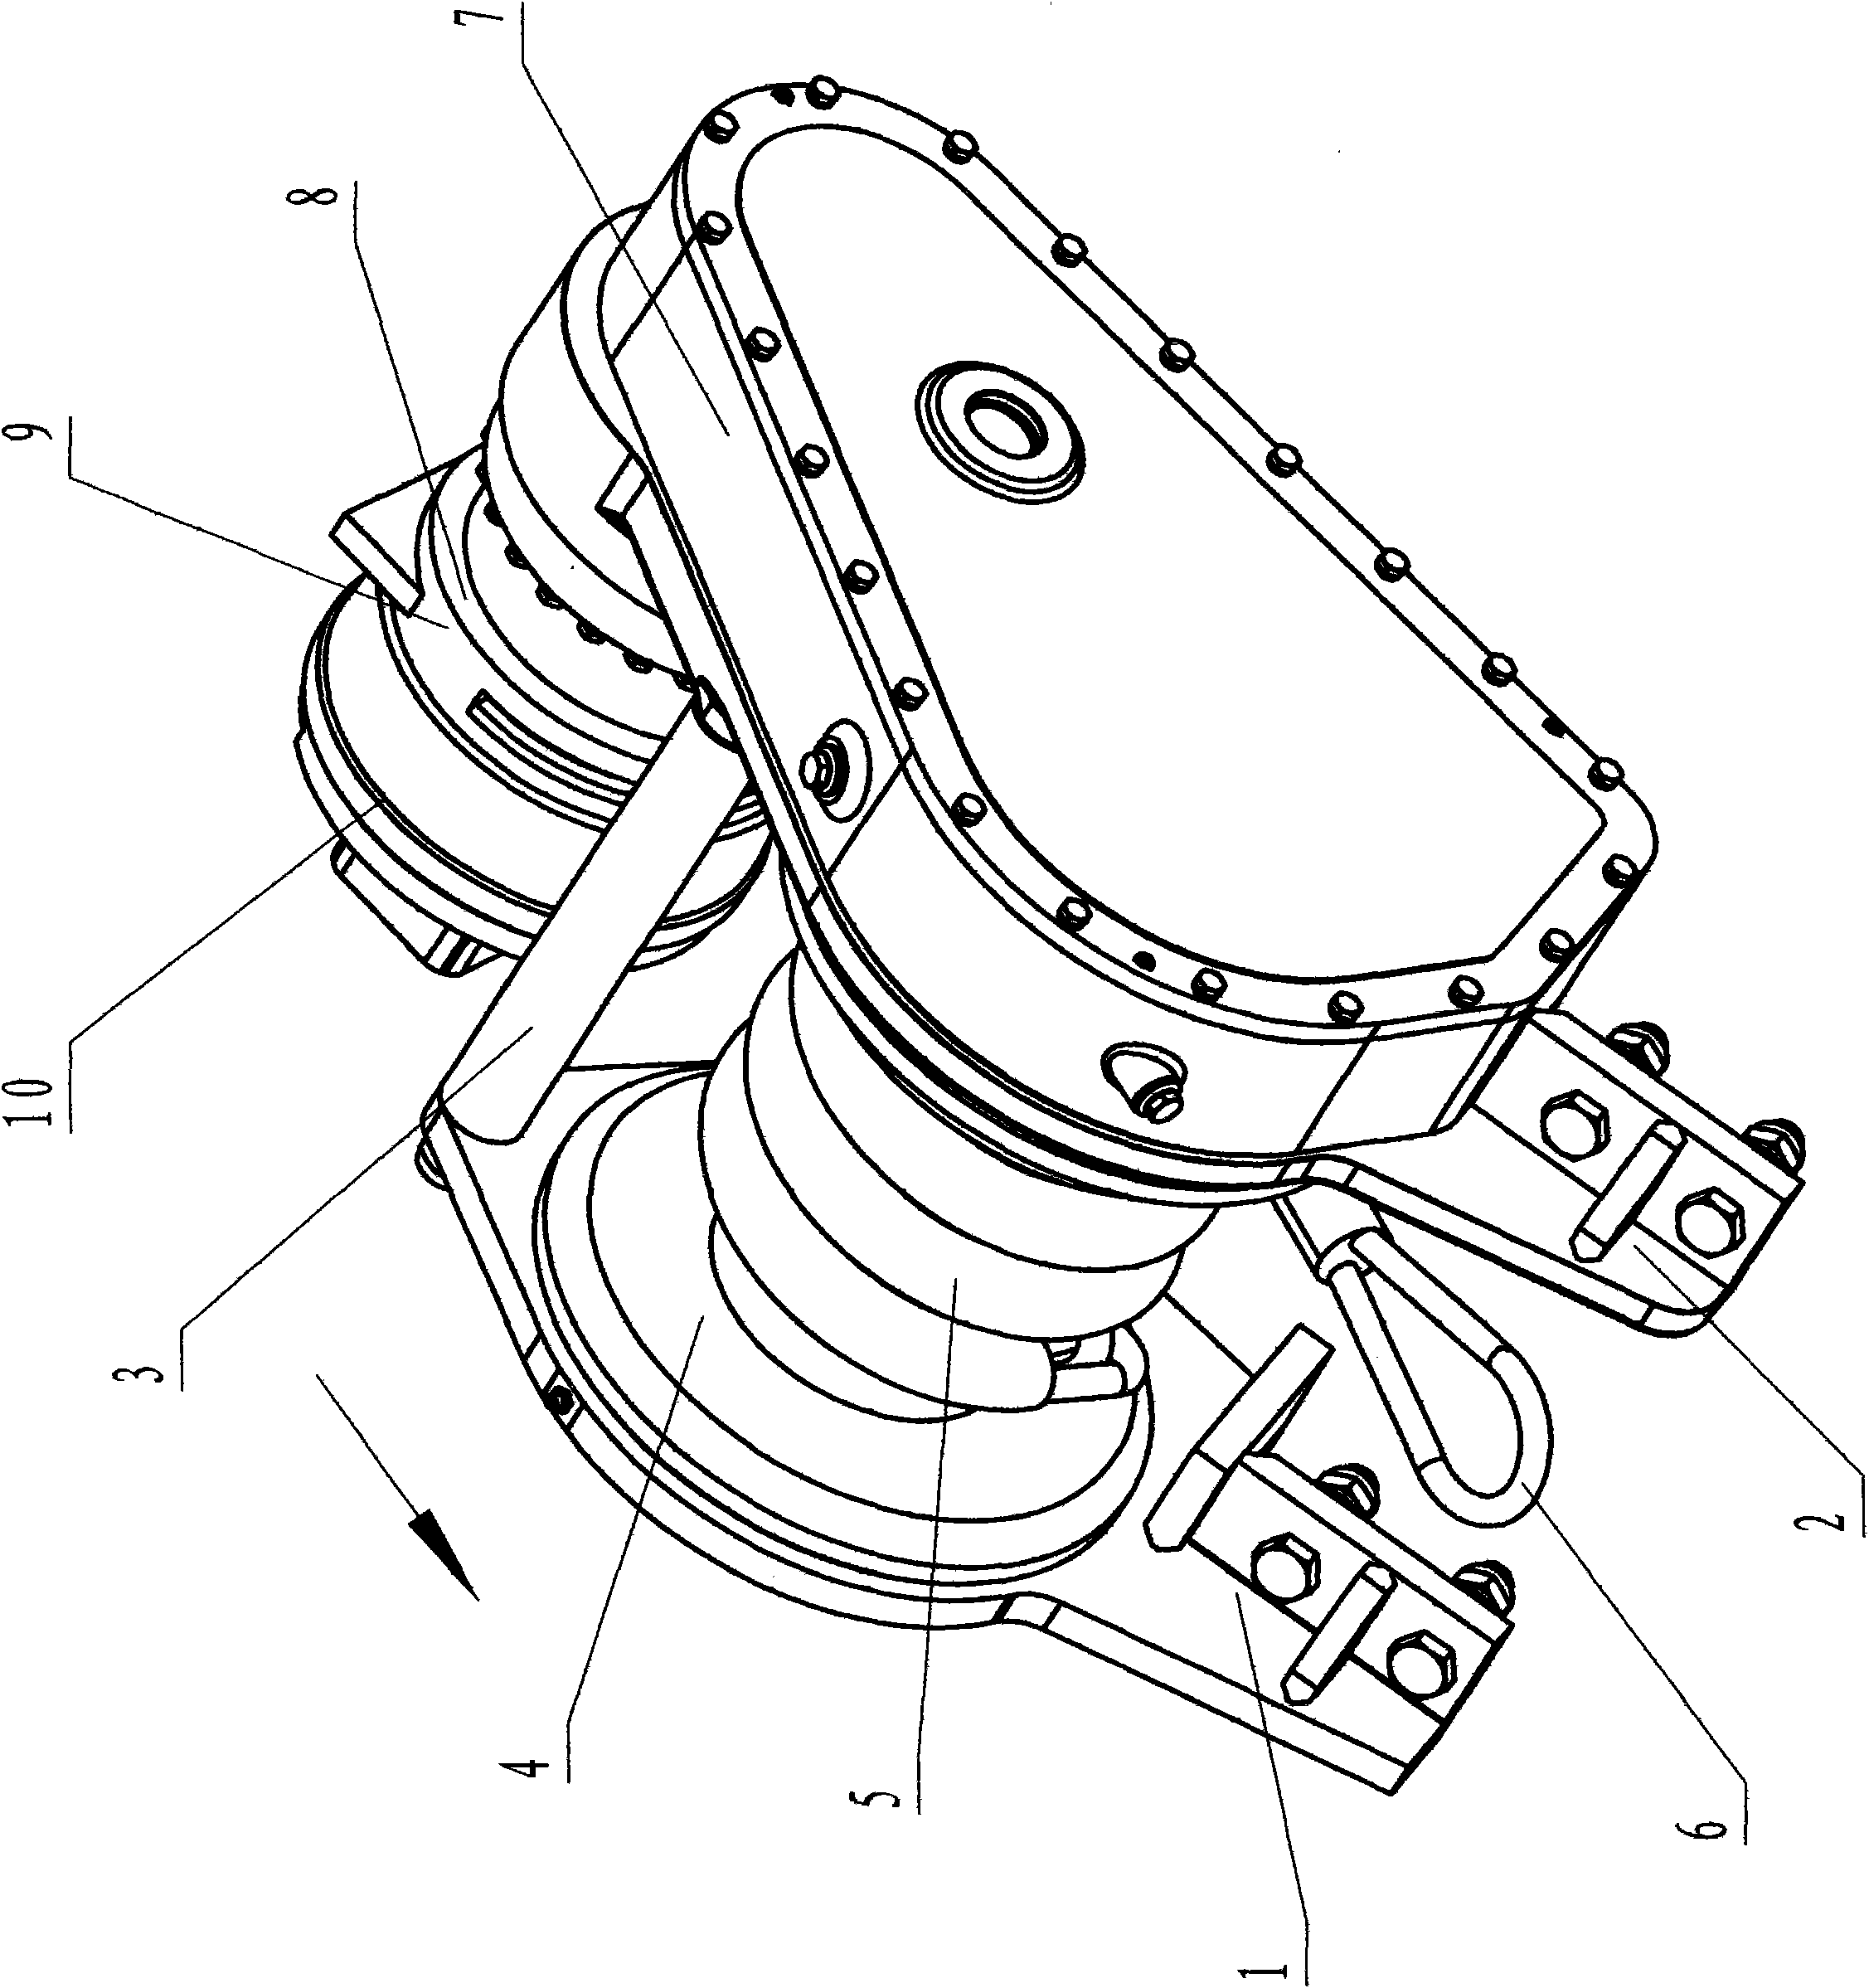 Vehicle-mounted explosion-proof hydraulic winch